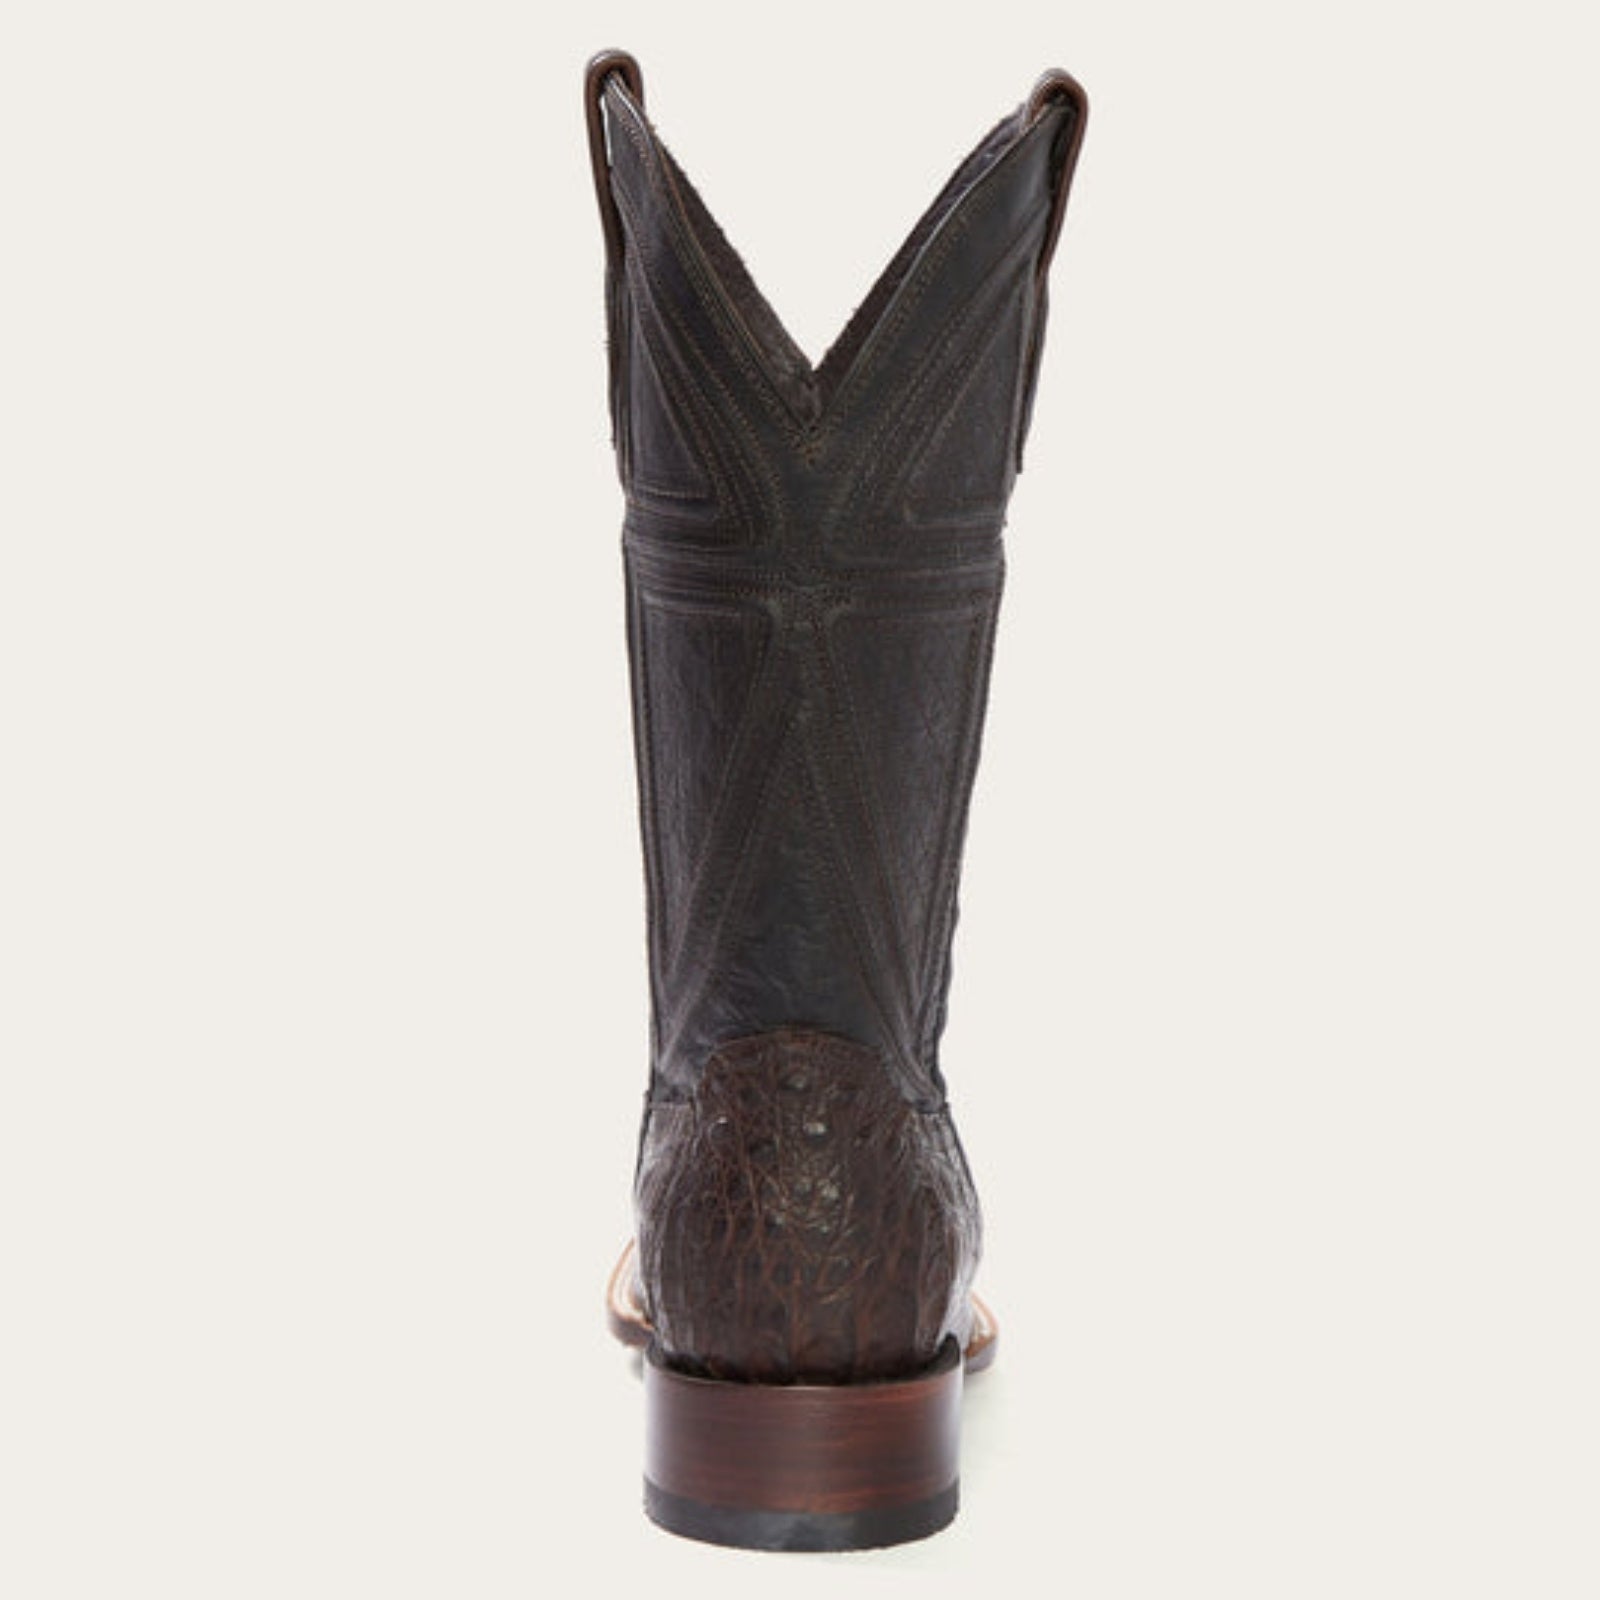 Stetson Men's Kaycee Brown Caiman Belly Square Toe Cowboy Boots 12-020 ...